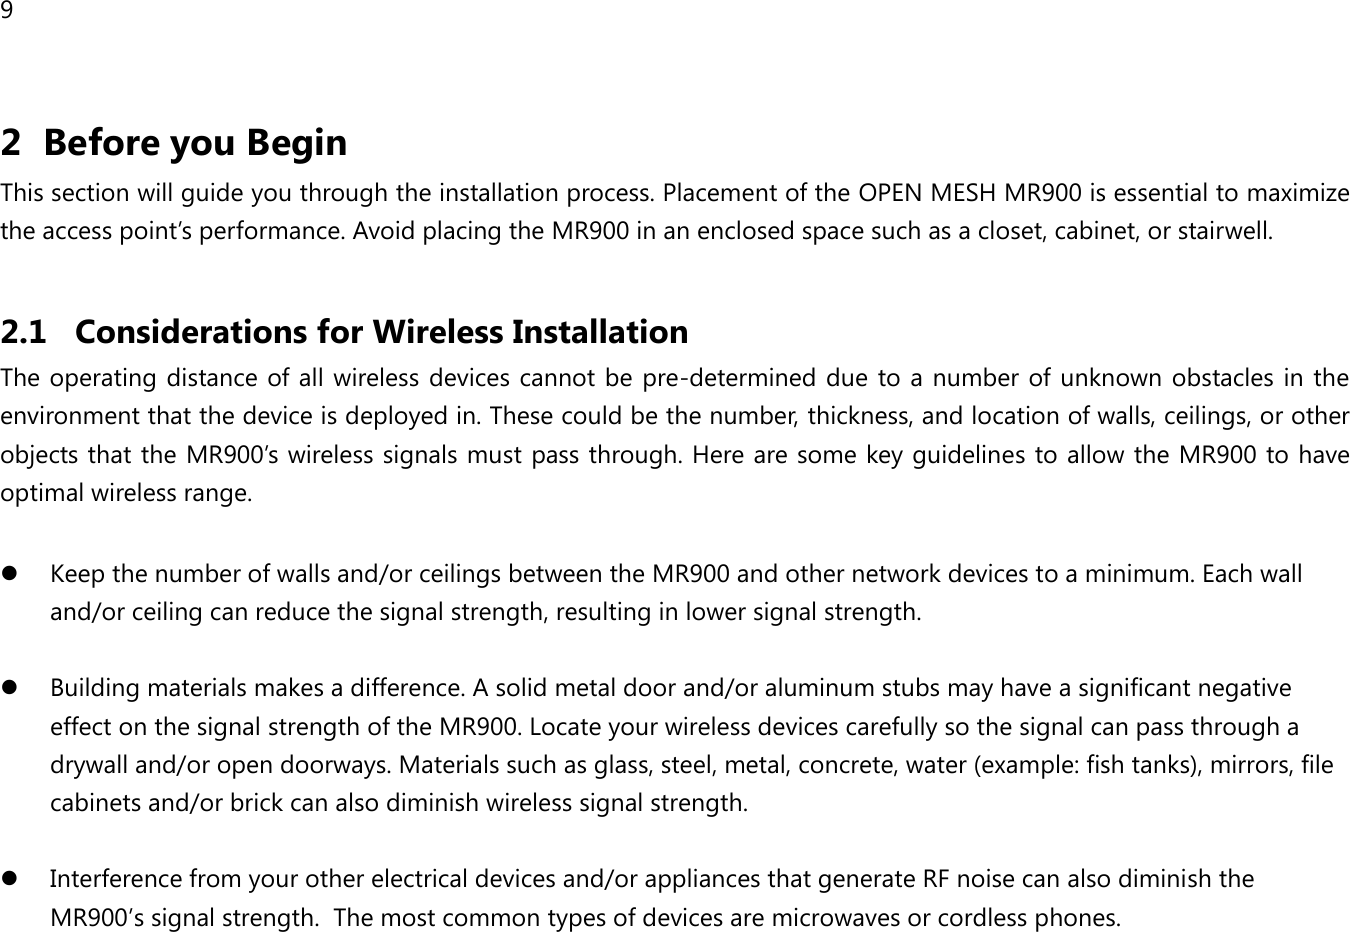 9 2 Before you Begin This section will guide you through the installation process. Placement of the OPEN MESH MR900 is essential to maximize the access point’s performance. Avoid placing the MR900 in an enclosed space such as a closet, cabinet, or stairwell.  2.1 Considerations for Wireless Installation The operating distance of all wireless devices cannot be pre-determined due to a number of unknown obstacles in the environment that the device is deployed in. These could be the number, thickness, and location of walls, ceilings, or other objects that the MR900’s wireless signals must pass through. Here are some key guidelines to allow the MR900 to have optimal wireless range.   Keep the number of walls and/or ceilings between the MR900 and other network devices to a minimum. Each wall and/or ceiling can reduce the signal strength, resulting in lower signal strength.   Building materials makes a difference. A solid metal door and/or aluminum stubs may have a significant negative effect on the signal strength of the MR900. Locate your wireless devices carefully so the signal can pass through a drywall and/or open doorways. Materials such as glass, steel, metal, concrete, water (example: fish tanks), mirrors, file cabinets and/or brick can also diminish wireless signal strength.   Interference from your other electrical devices and/or appliances that generate RF noise can also diminish the MR900’s signal strength.  The most common types of devices are microwaves or cordless phones.  